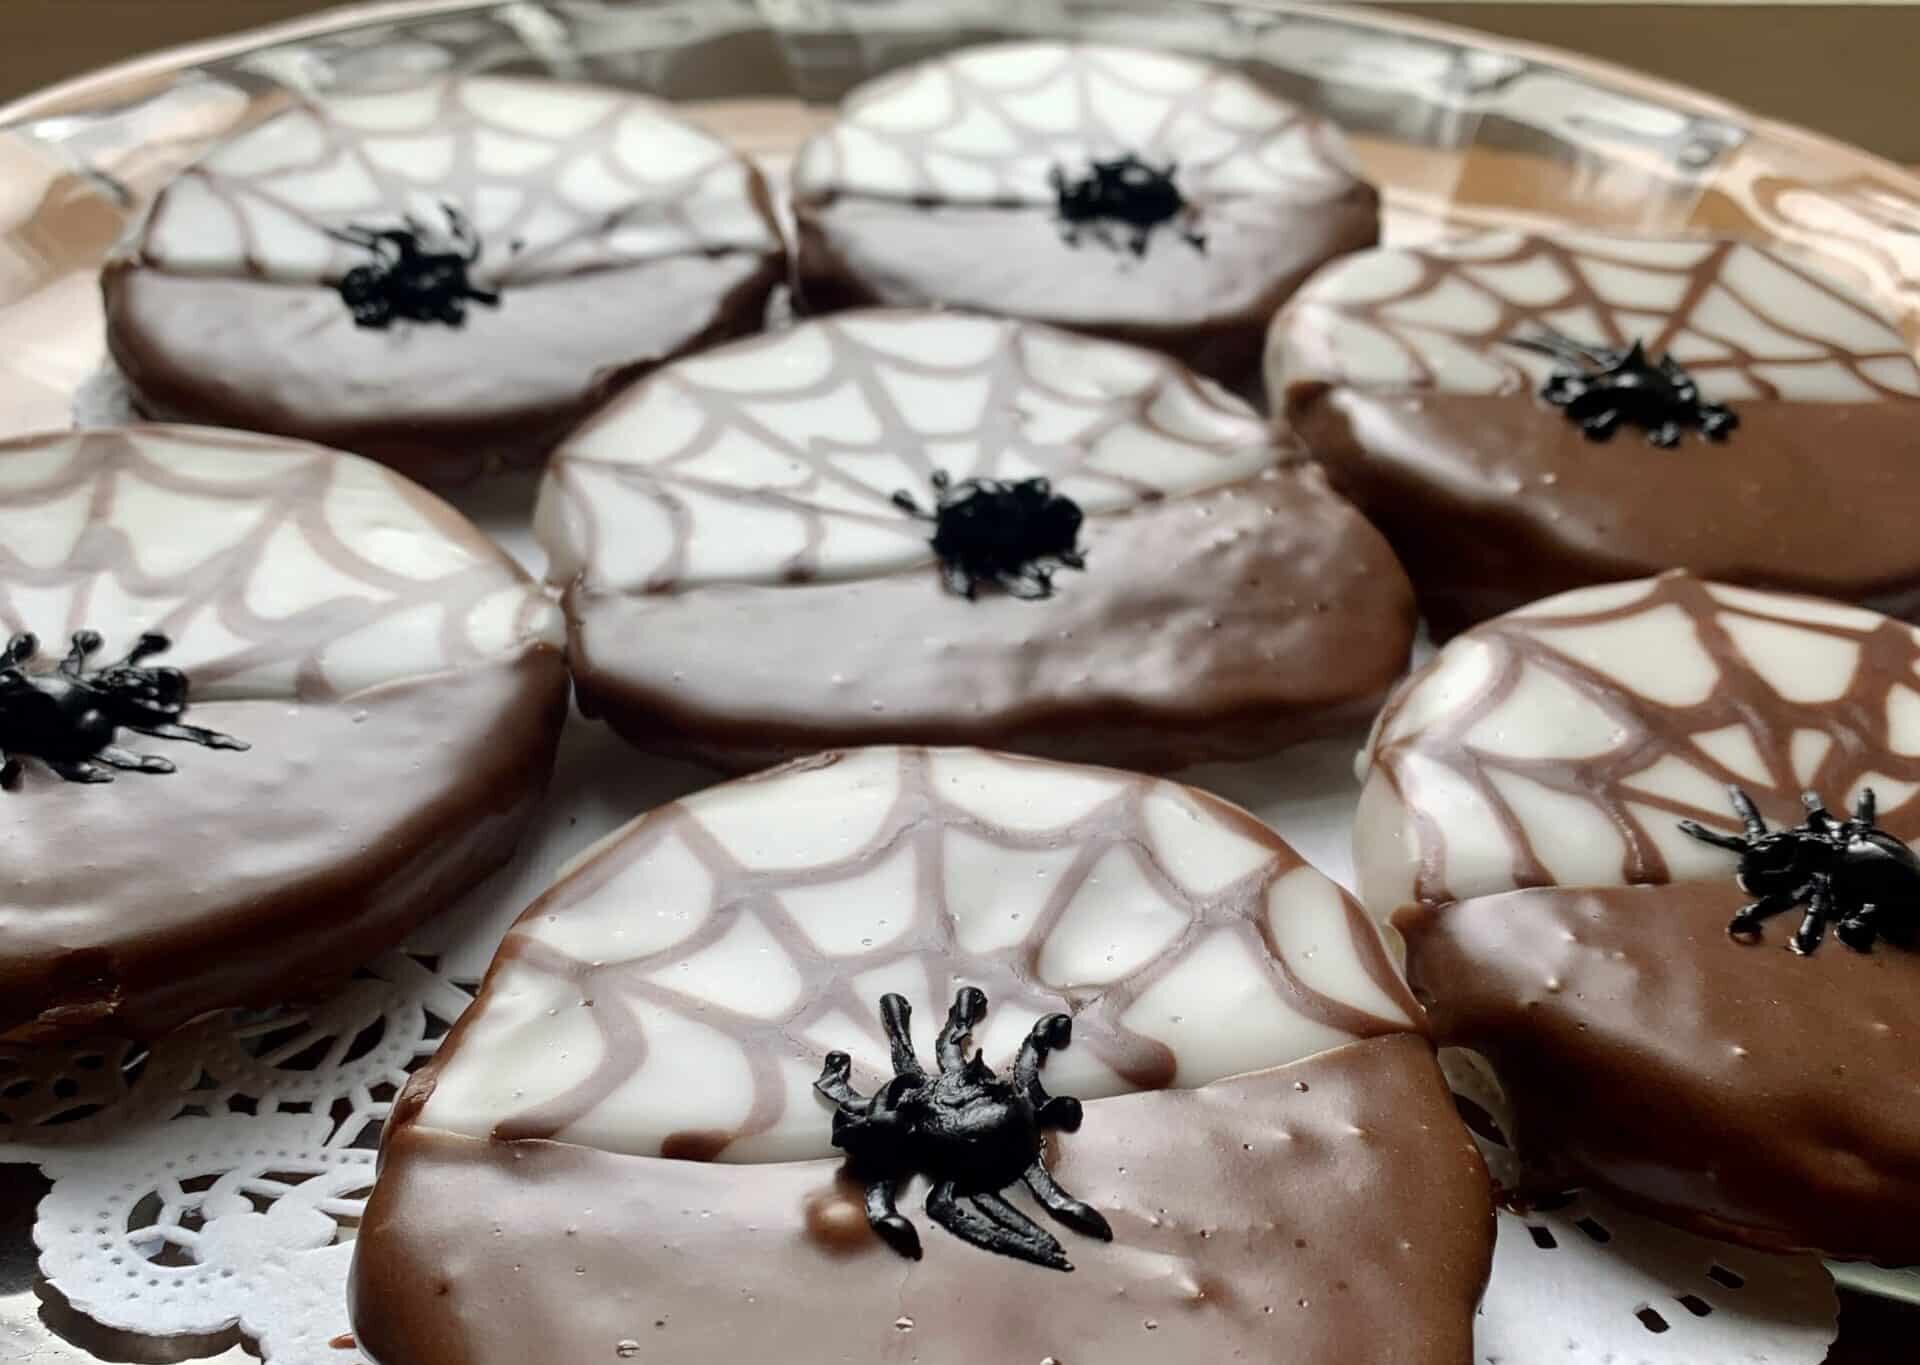 Scary Spidey Cookies by Pinecrest B&B